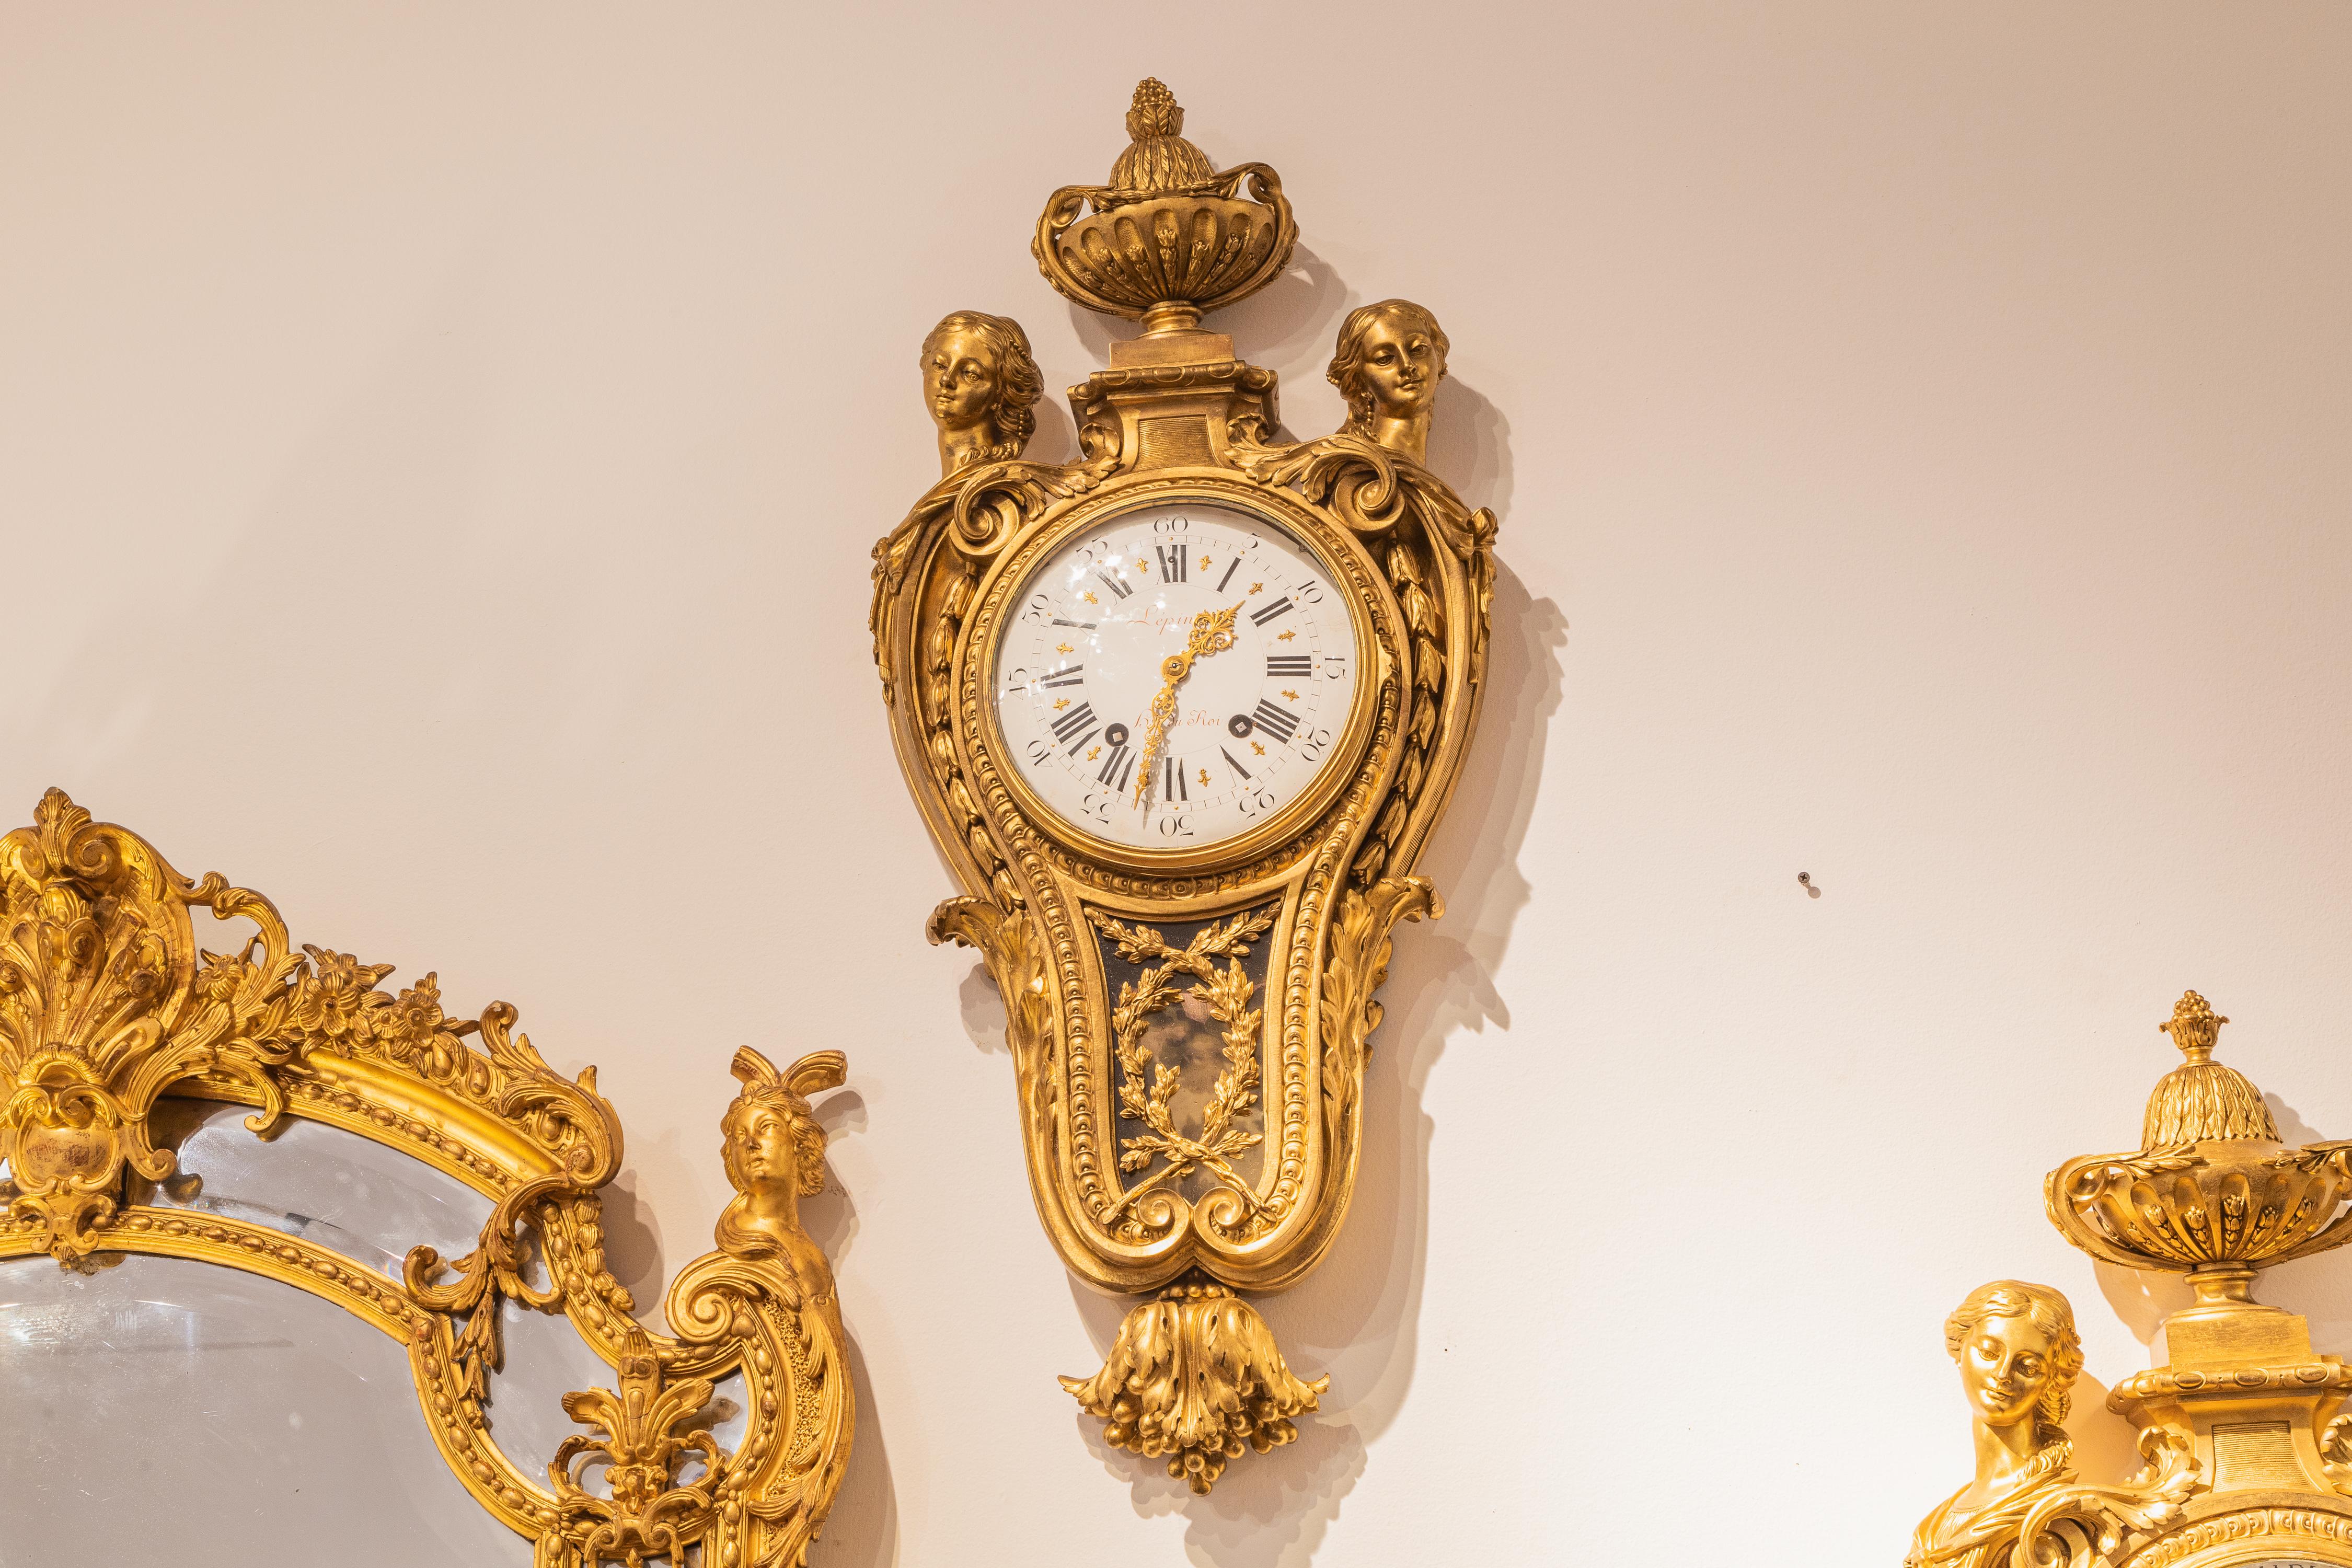 A fine and rare pair of late 18th century to early 19th century French gilt bronze clock and Barometer set by Jean Antoine Lepine. 

Appointment to the King 
Jean Lepine moved to Paris in 1774 when he was 24 years of age . He  was the apprentice to